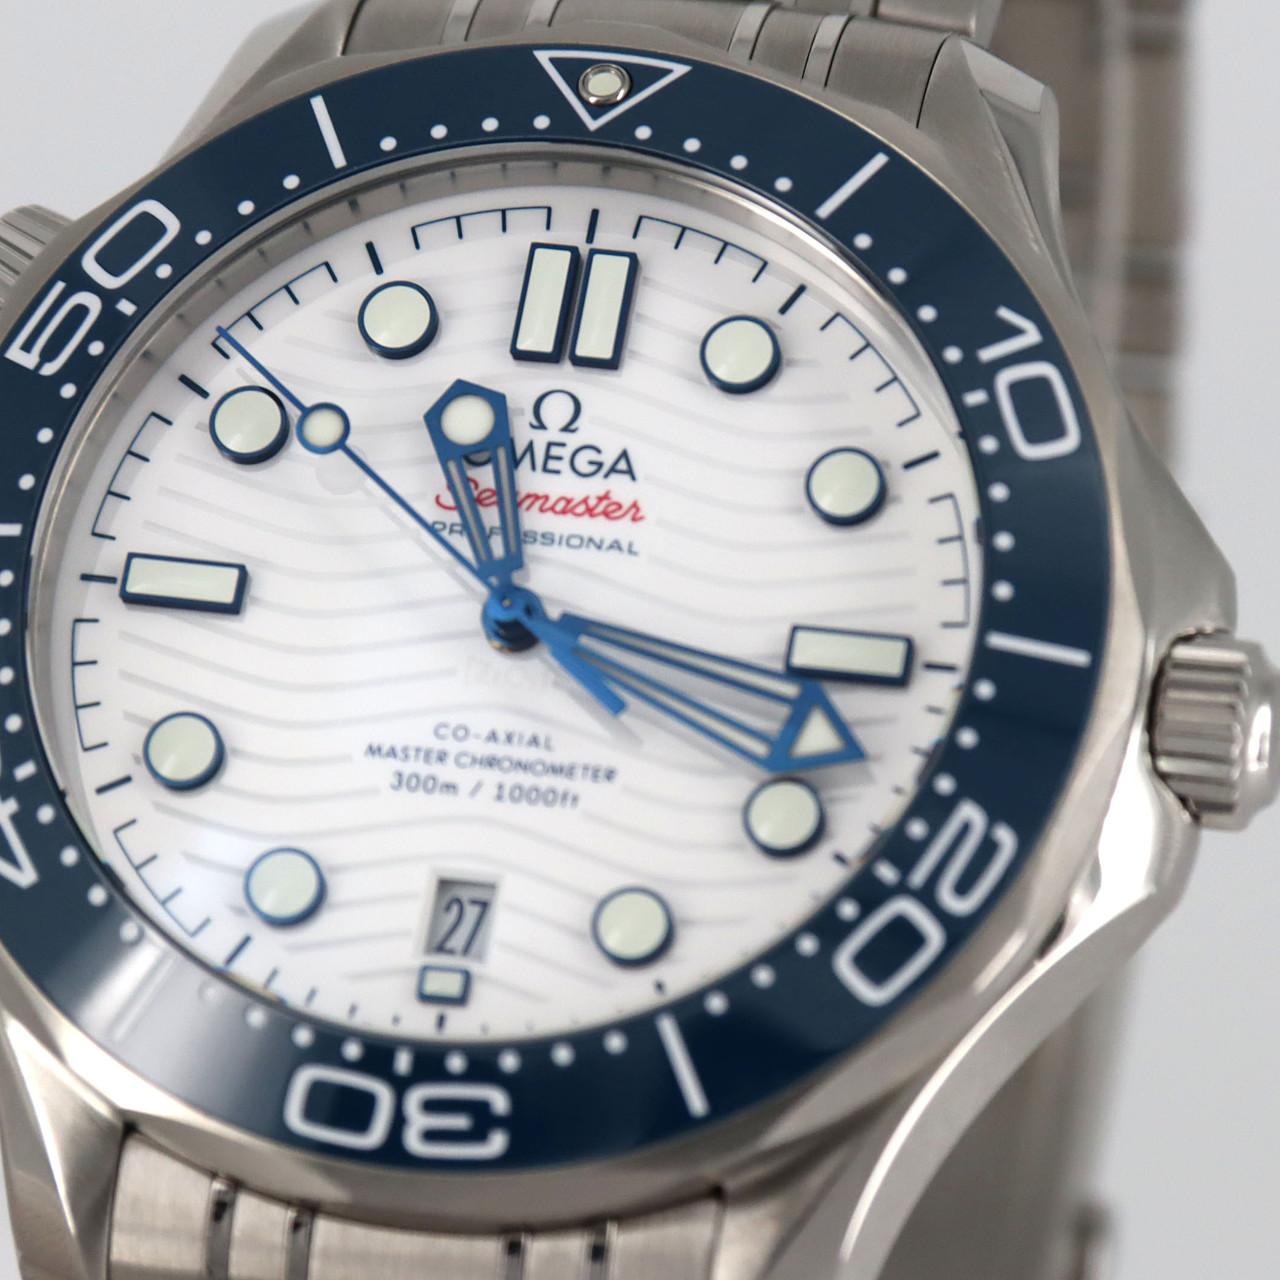 Omega Seamaster Diver 300M/Tokyo 2020 Olympics 522.30.42.20.04.001 SS Automatic